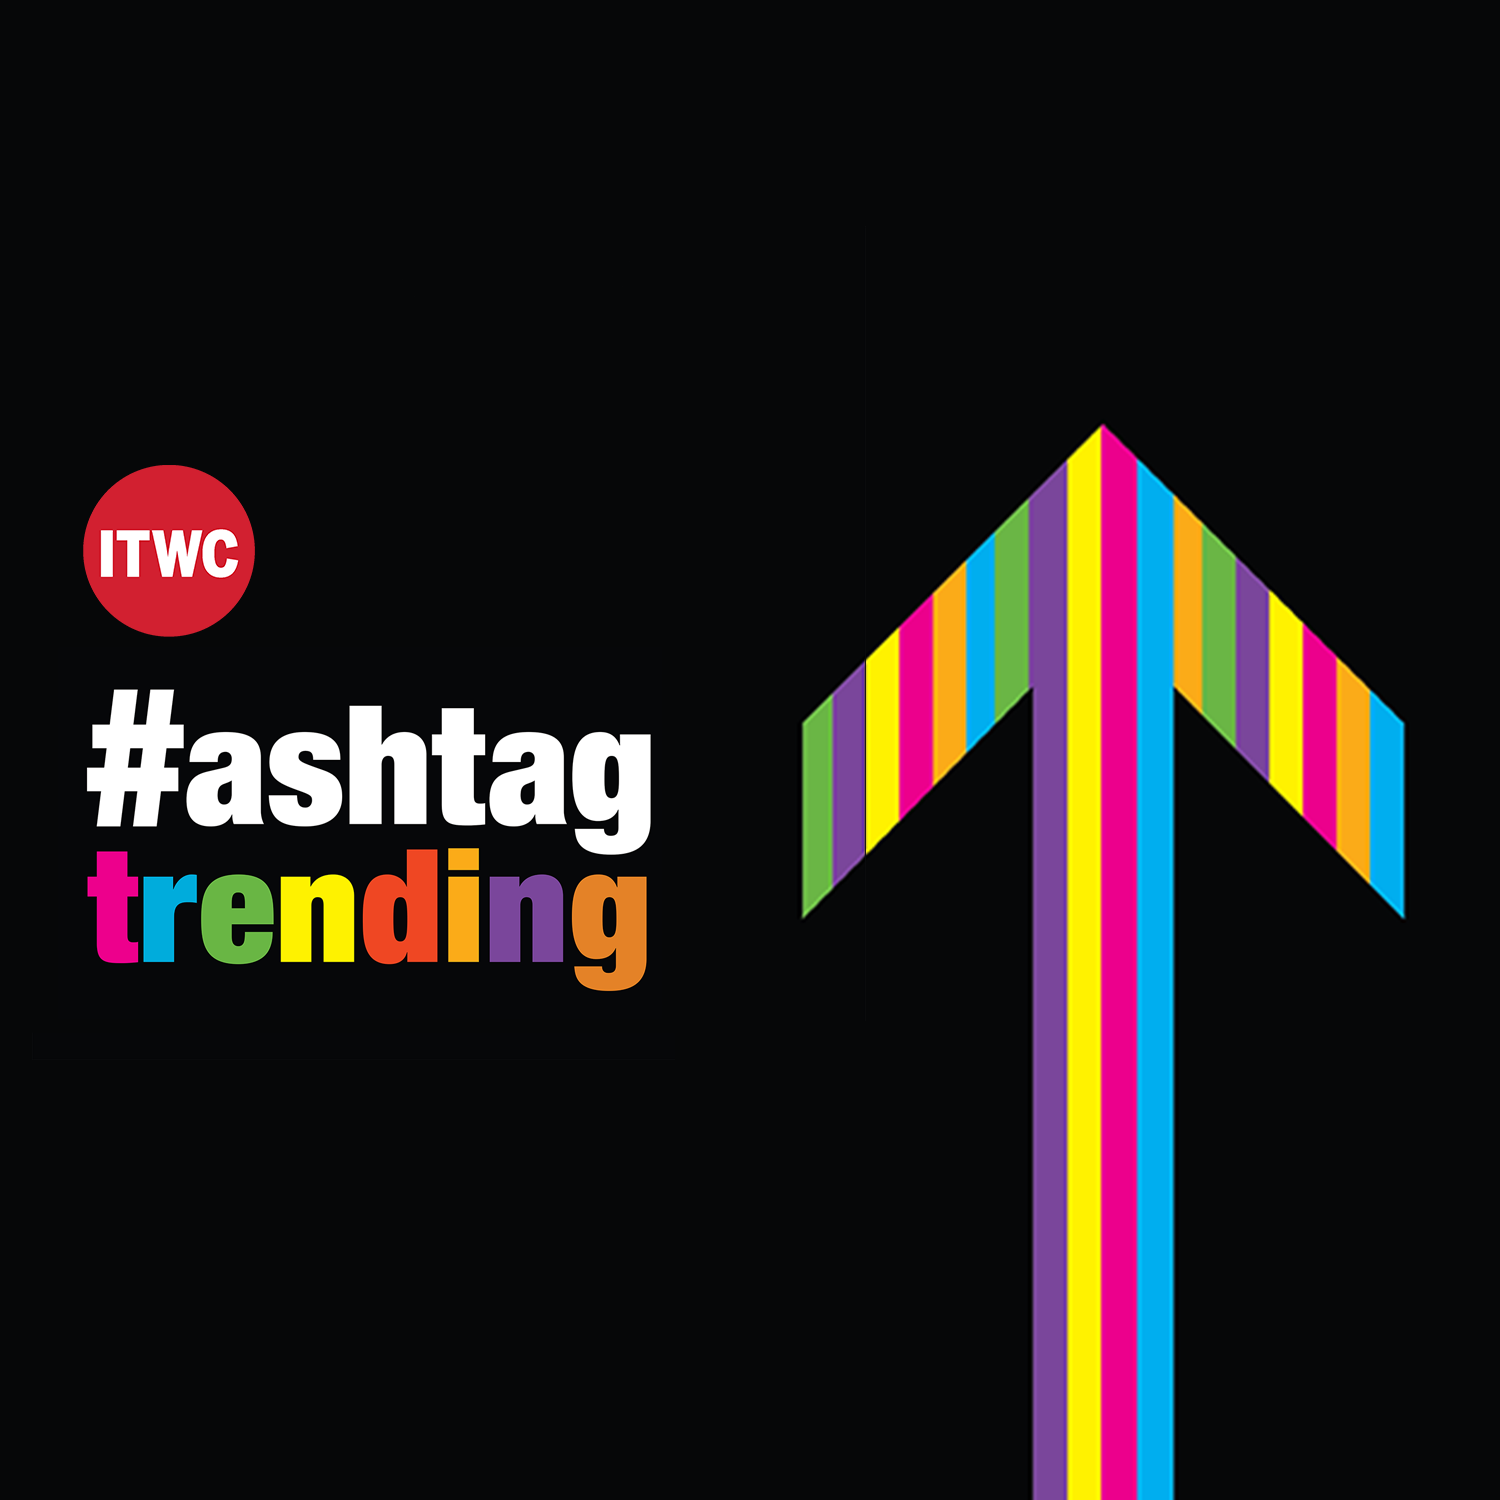 Hashtag Trending Dec 20 – IRS releases private data; Big tech tops list for companies with …